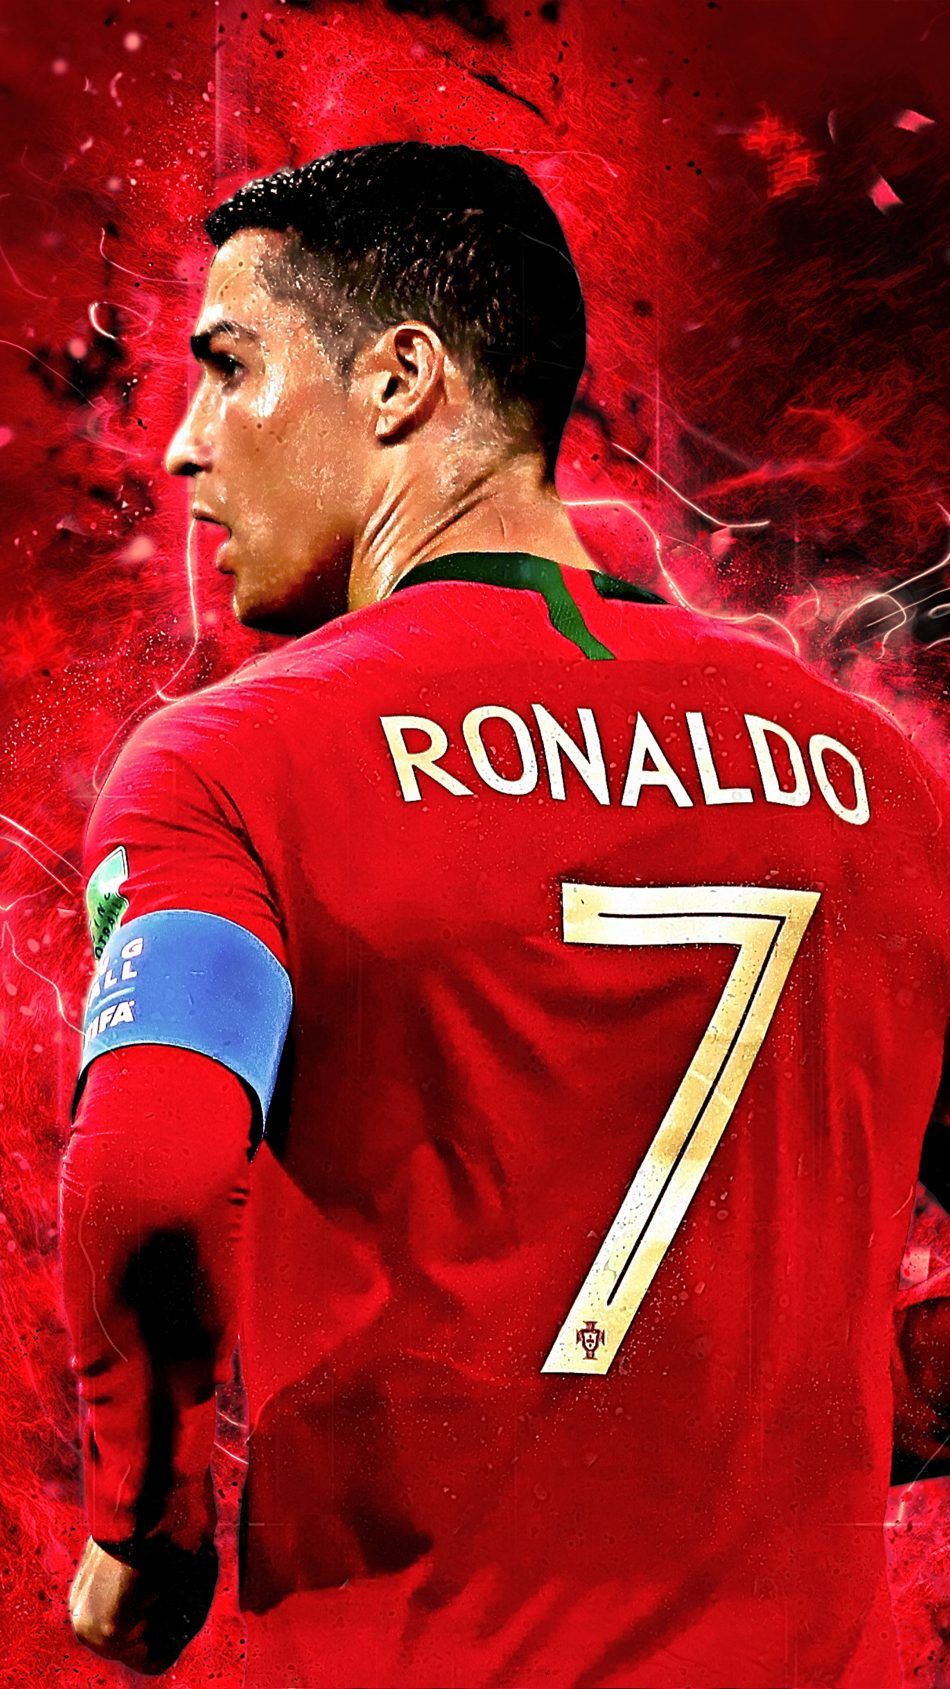 Cristiano Ronaldo Jersey Number 7 4k Ultra HD Mobile